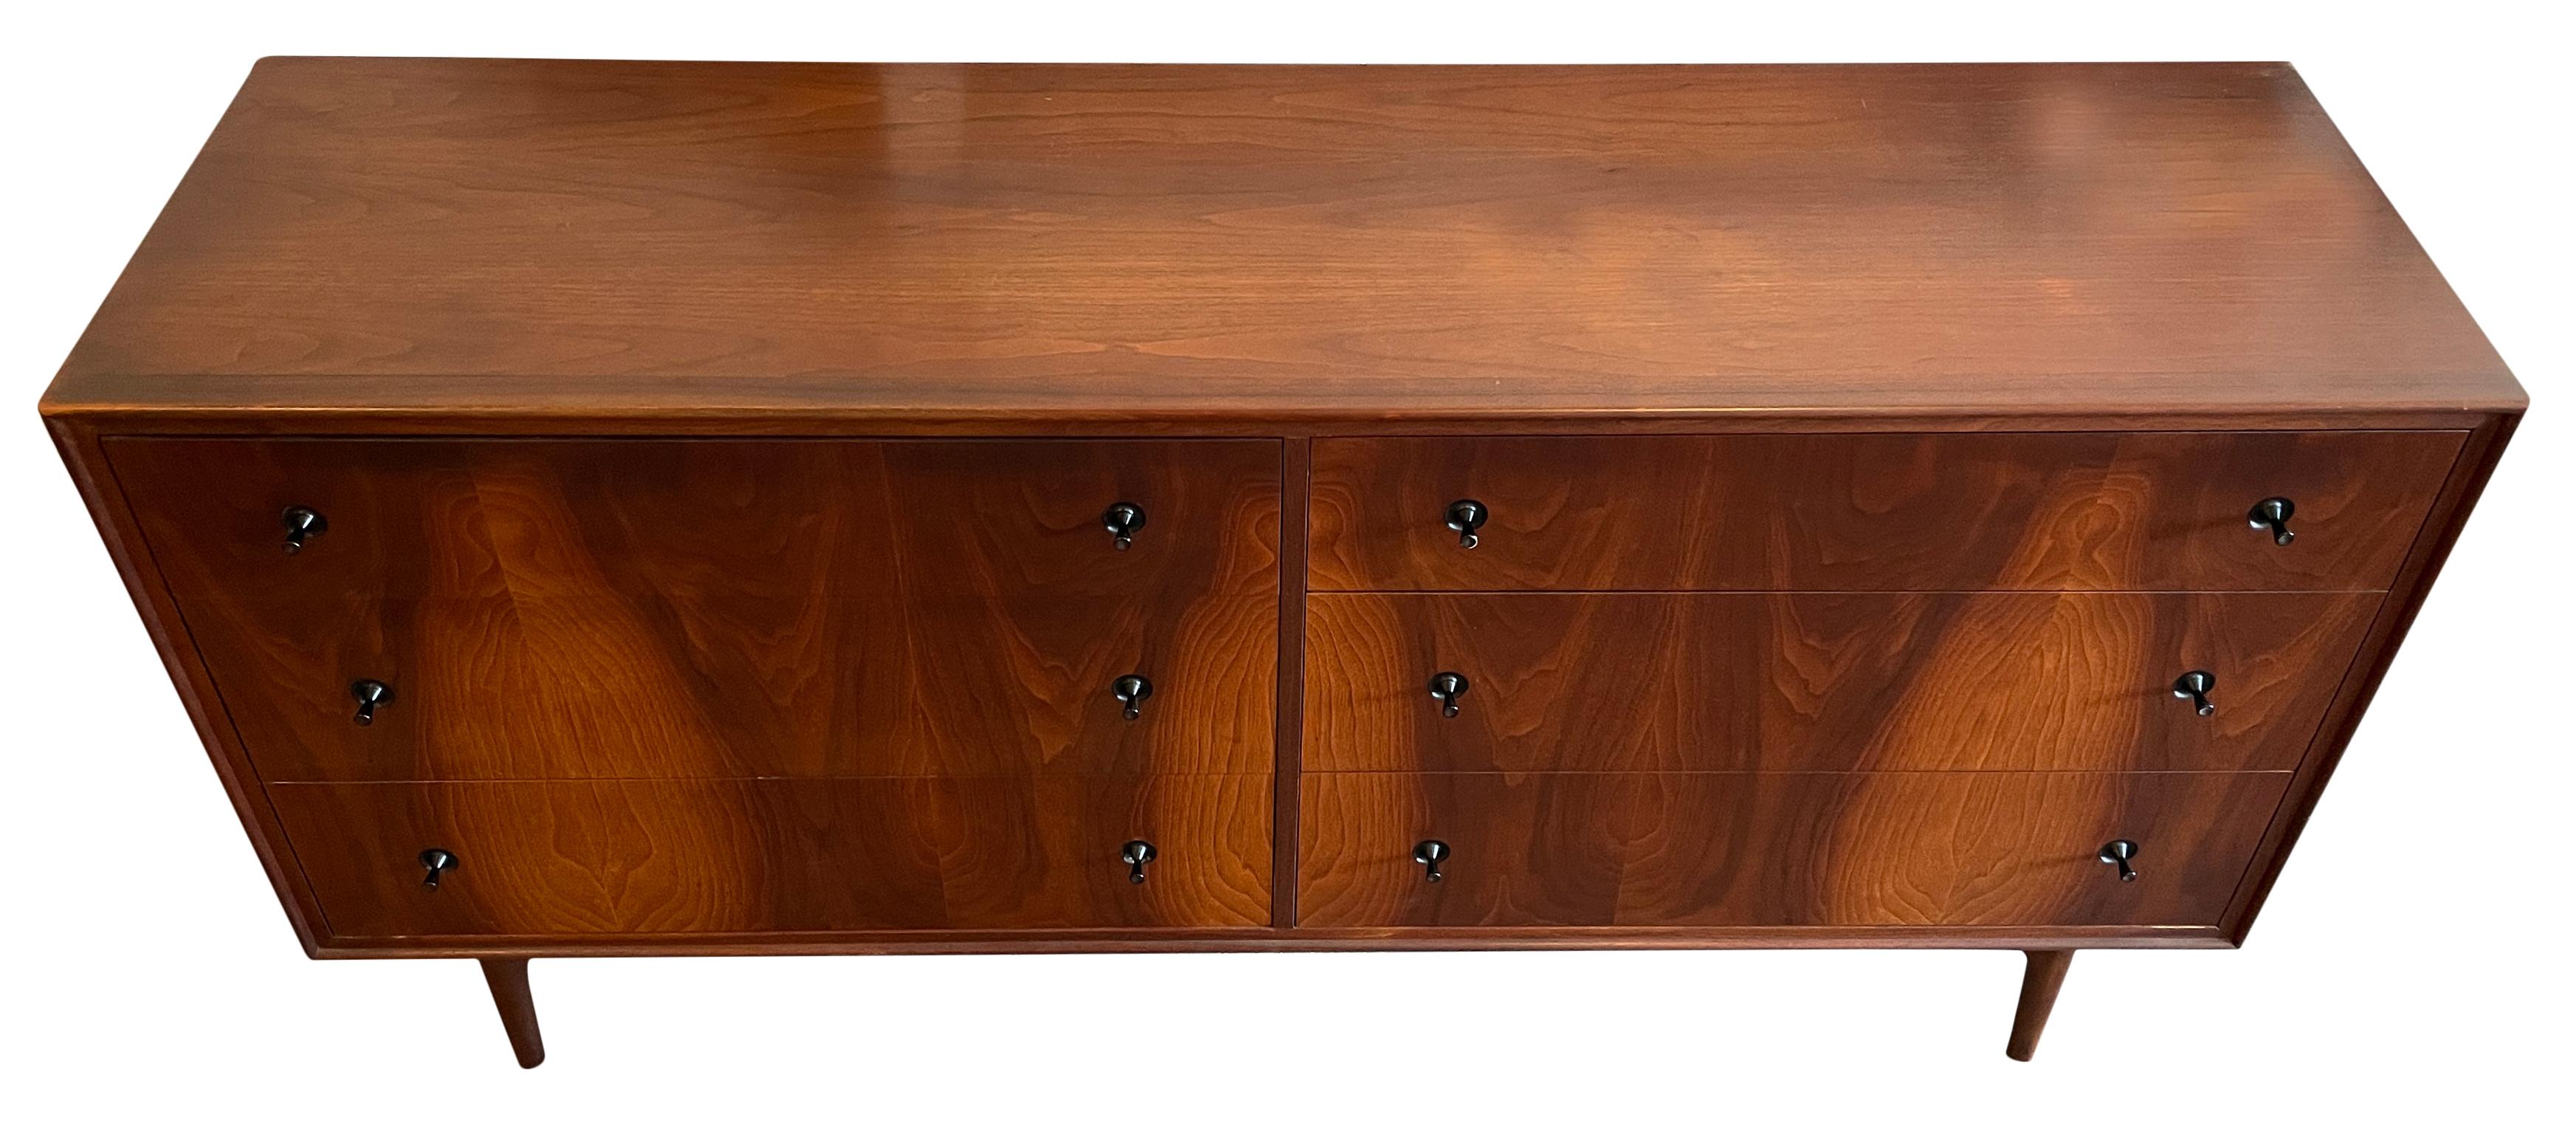 Stunning Mid-Century Modern 6 drawer walnut dresser veneer front. Beautiful grain American made dresser solid walnut and veneers. Clean inside and out - all drawers slide smooth. Black tapered knobs and sits on a solid walnut sculpted base. Very